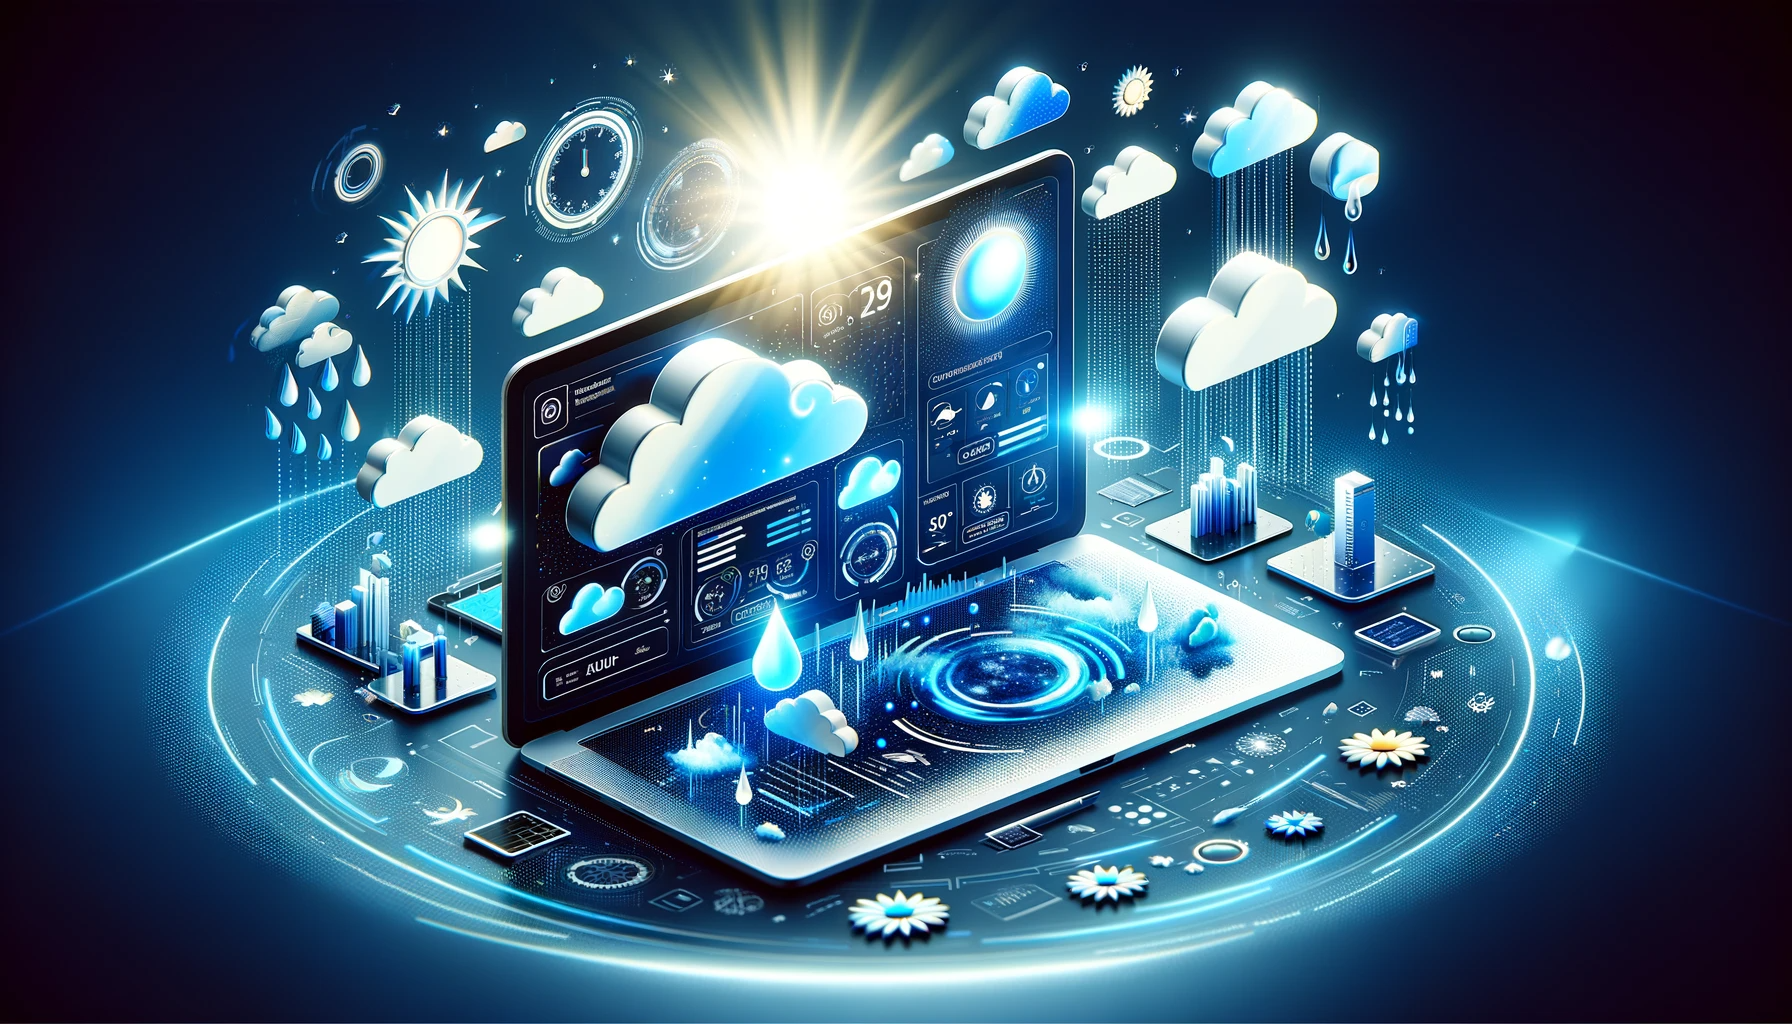 Modern computer screen displaying a weather API interface, with dynamic background elements like clouds, sun, and raindrops, in blue and white tones, symbolizing the integration of weather technology and forecasting for an article on the best practices in weather API development.